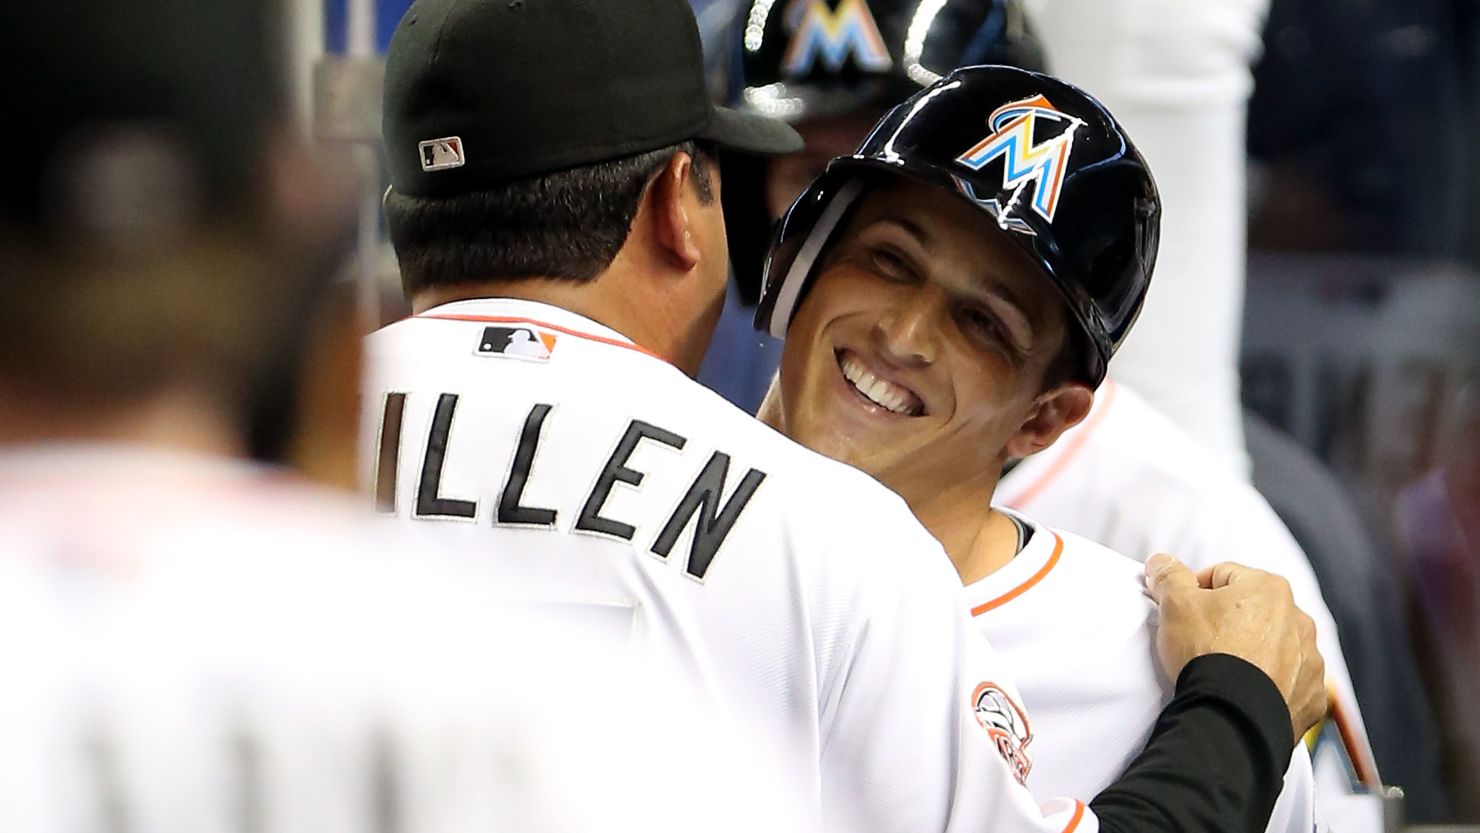 Adam Greenberg hugs Miami Marlins manager Ozzie Guillen after his at-bat Tuesday night against the New York Mets.